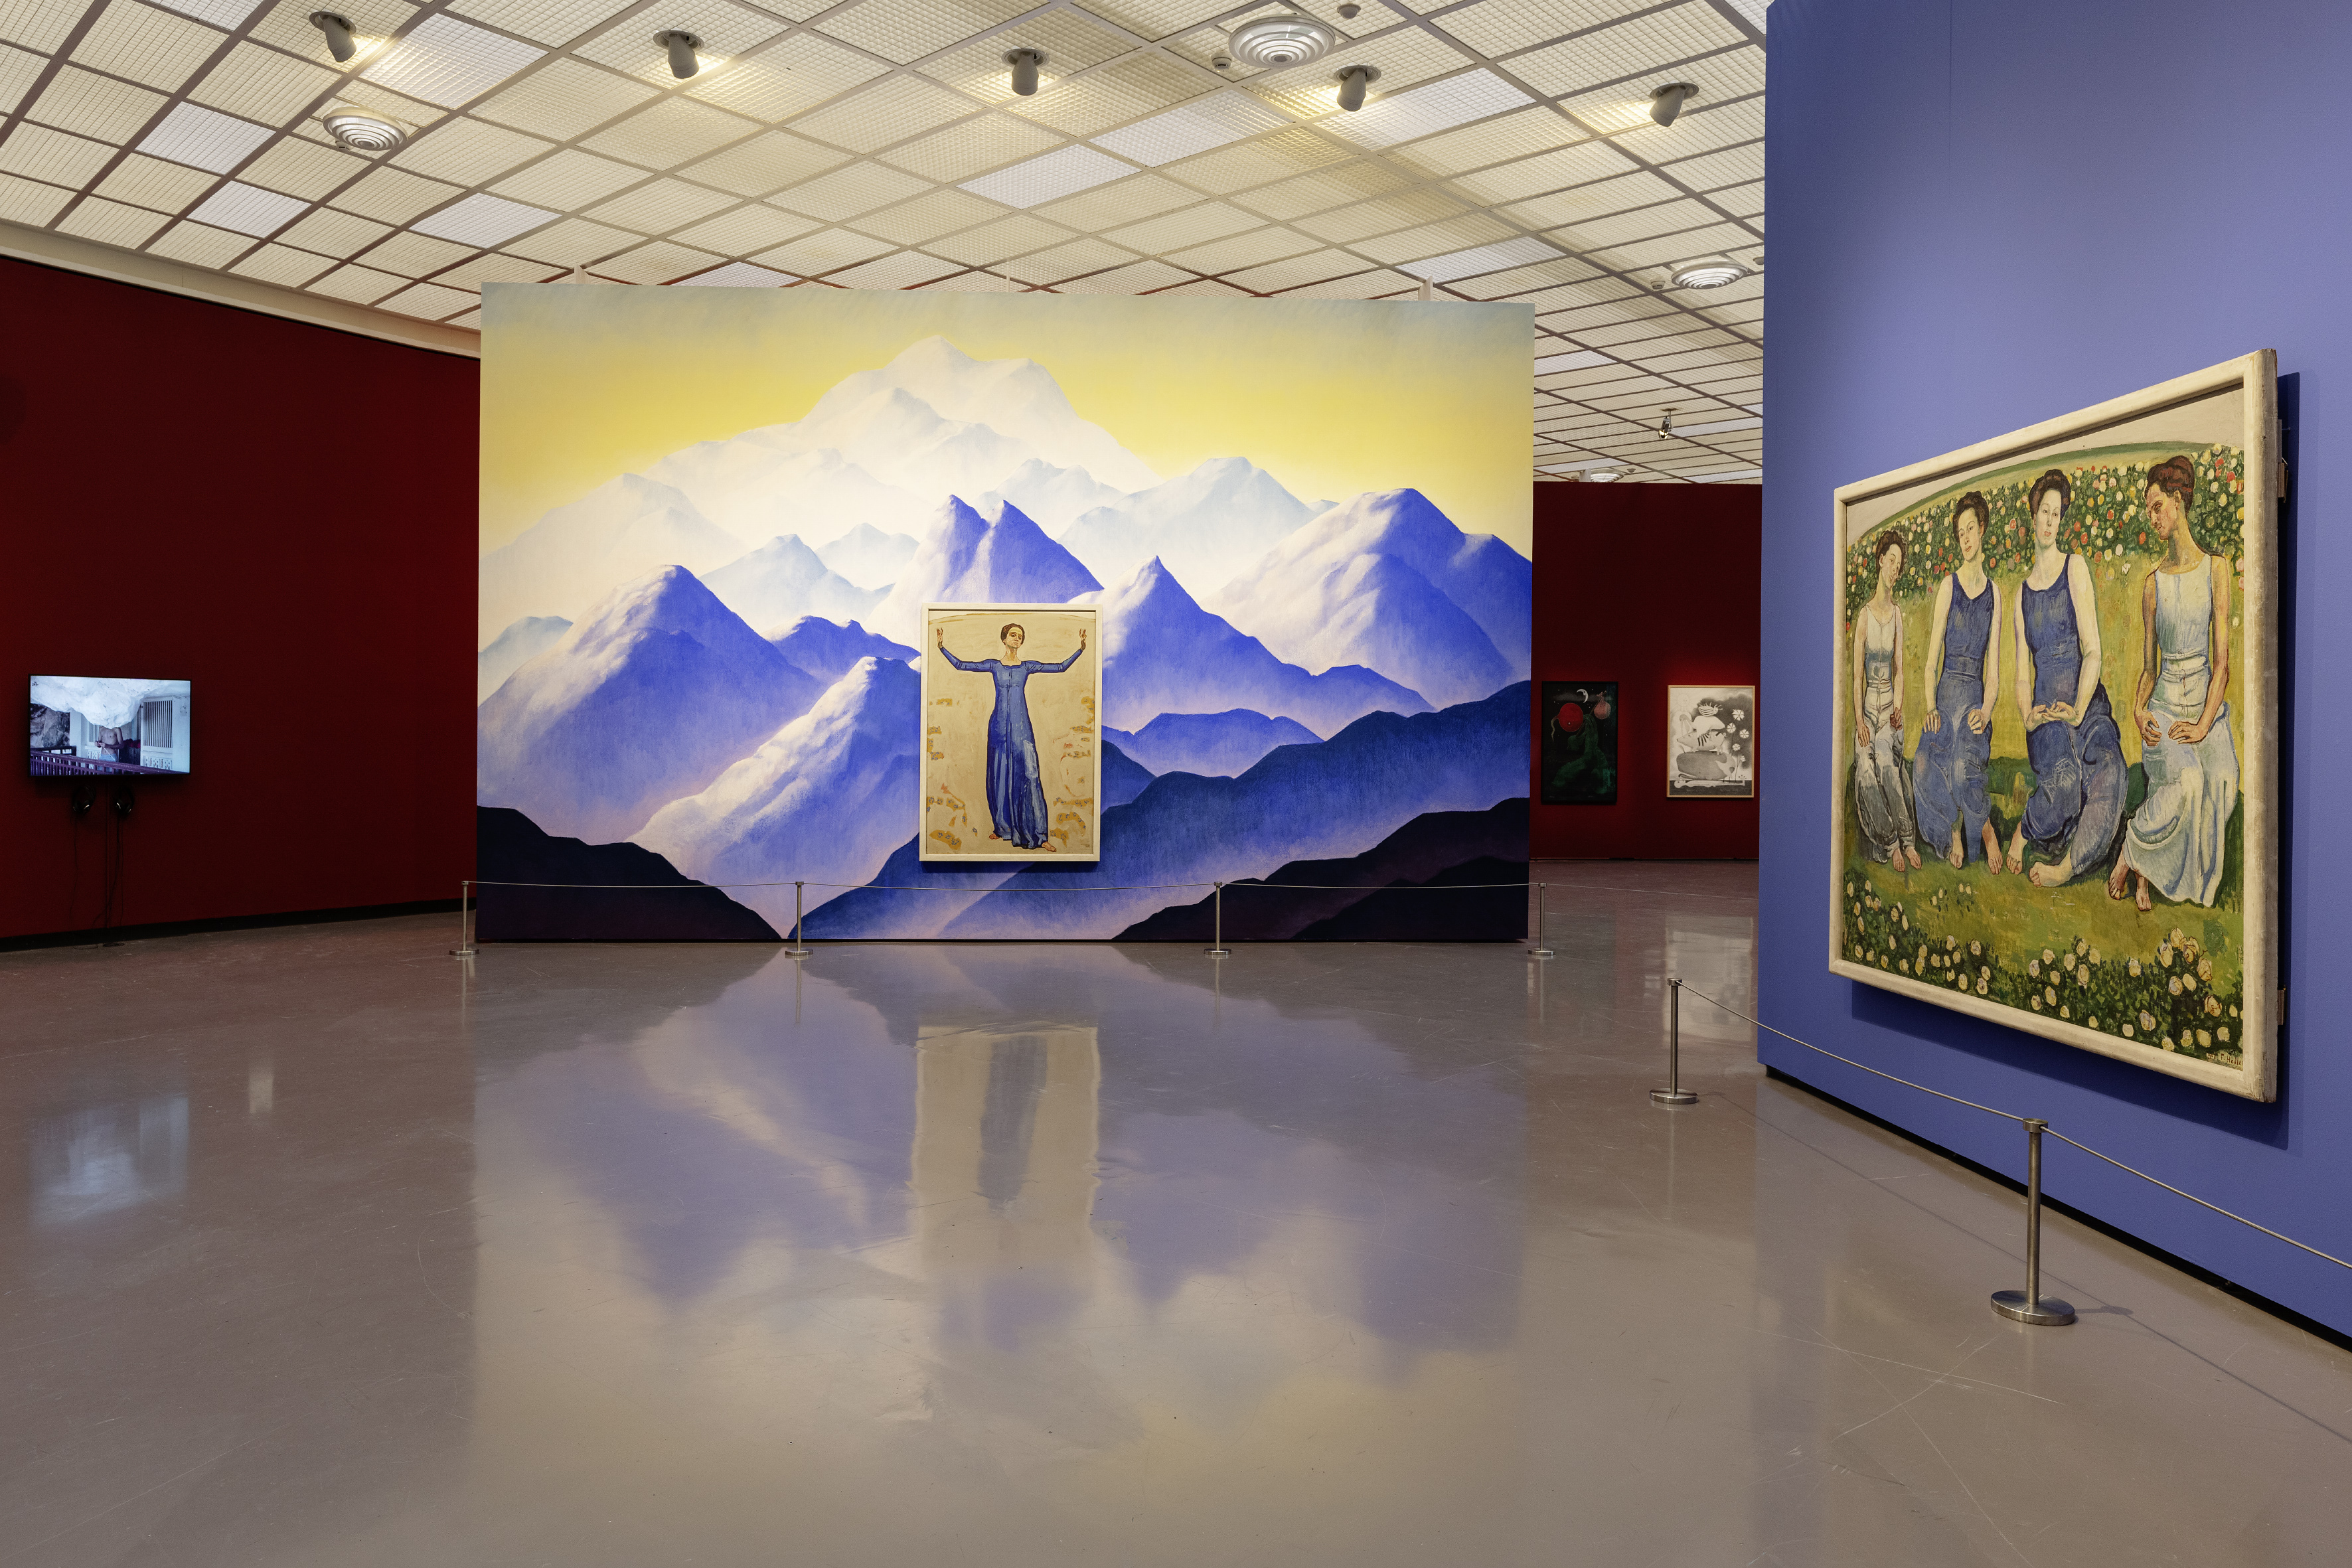 Overview of the Hodler exhibition at Kunsthaus Zurich